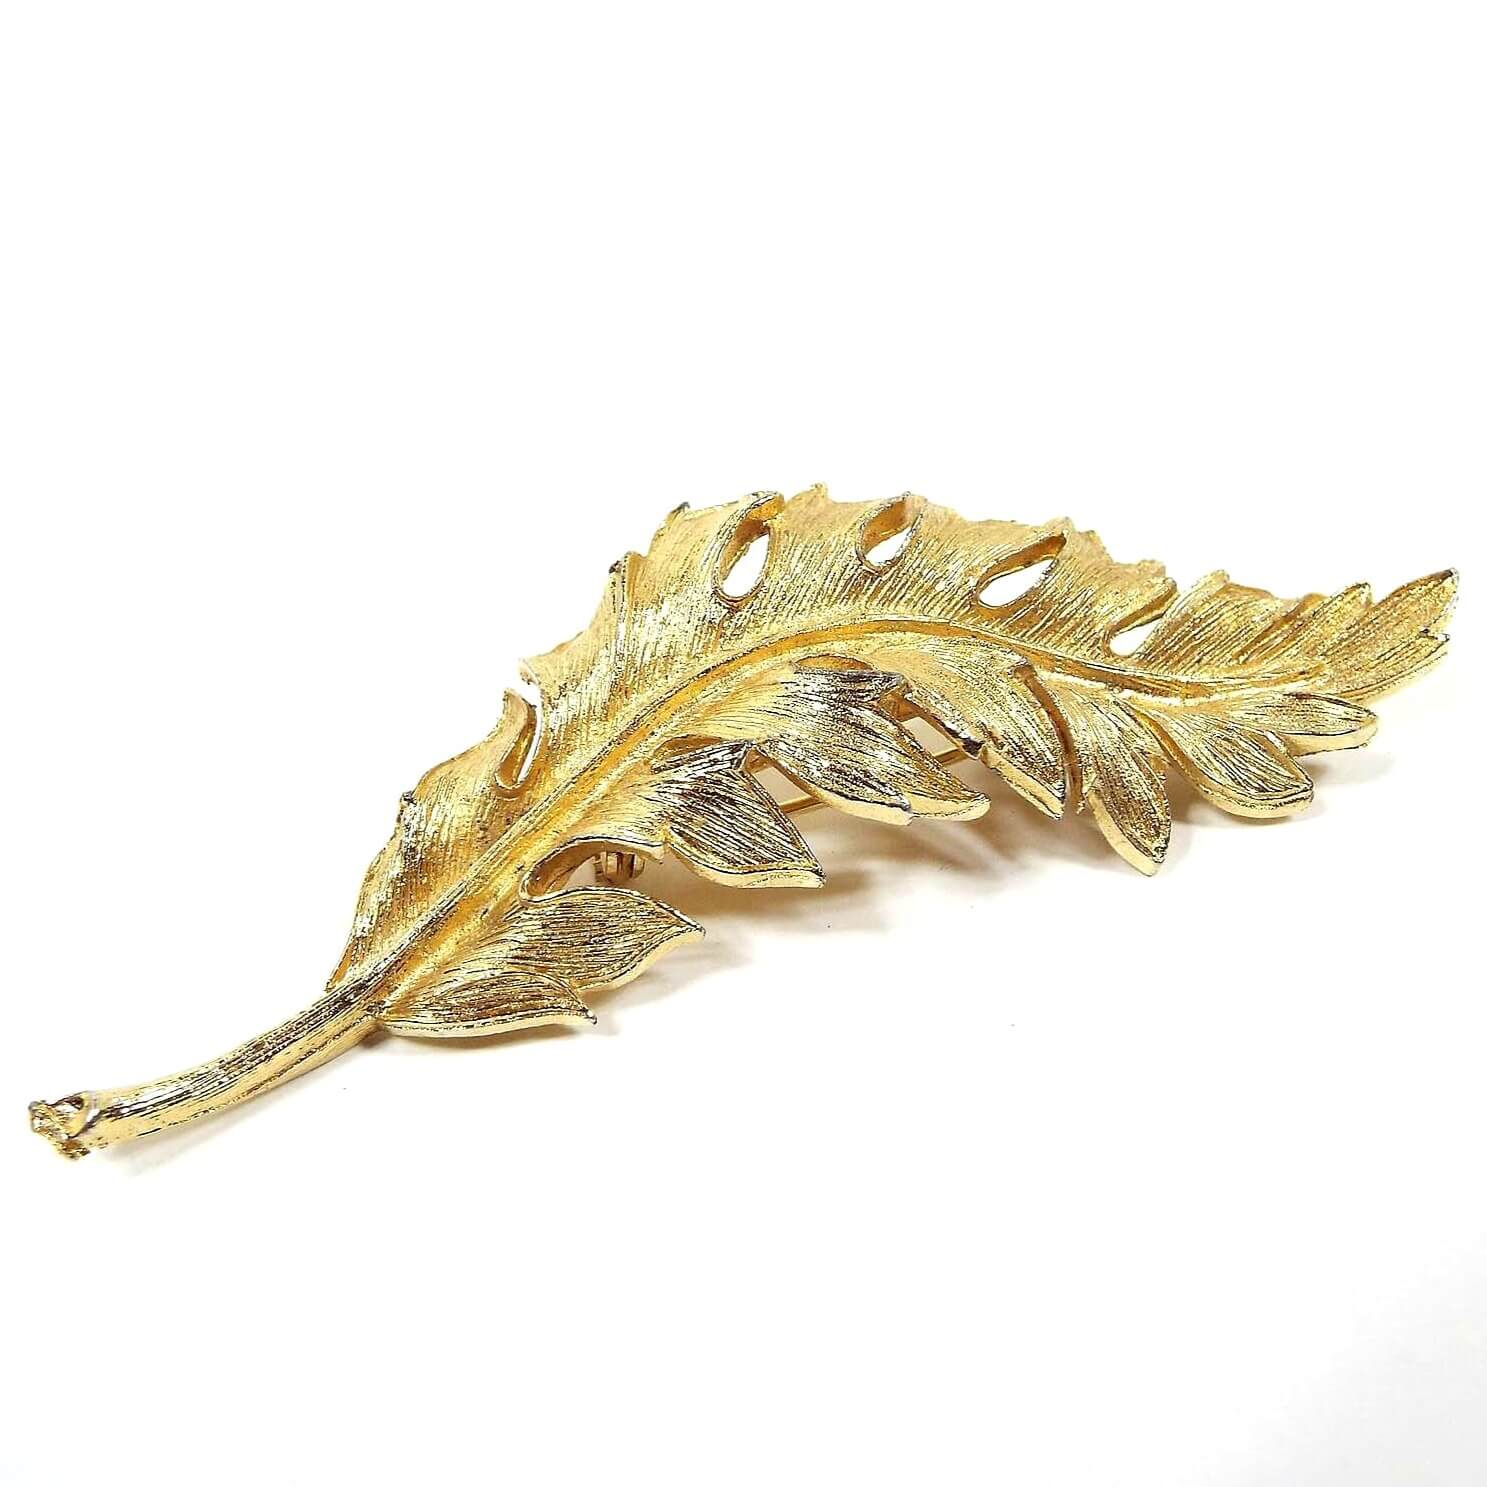 Front view of the 1961 Mid Century vintage Coro leaf brooch pin. It is shaped like a long leaf with stem and is nicely detailed in gold tone color metal. 